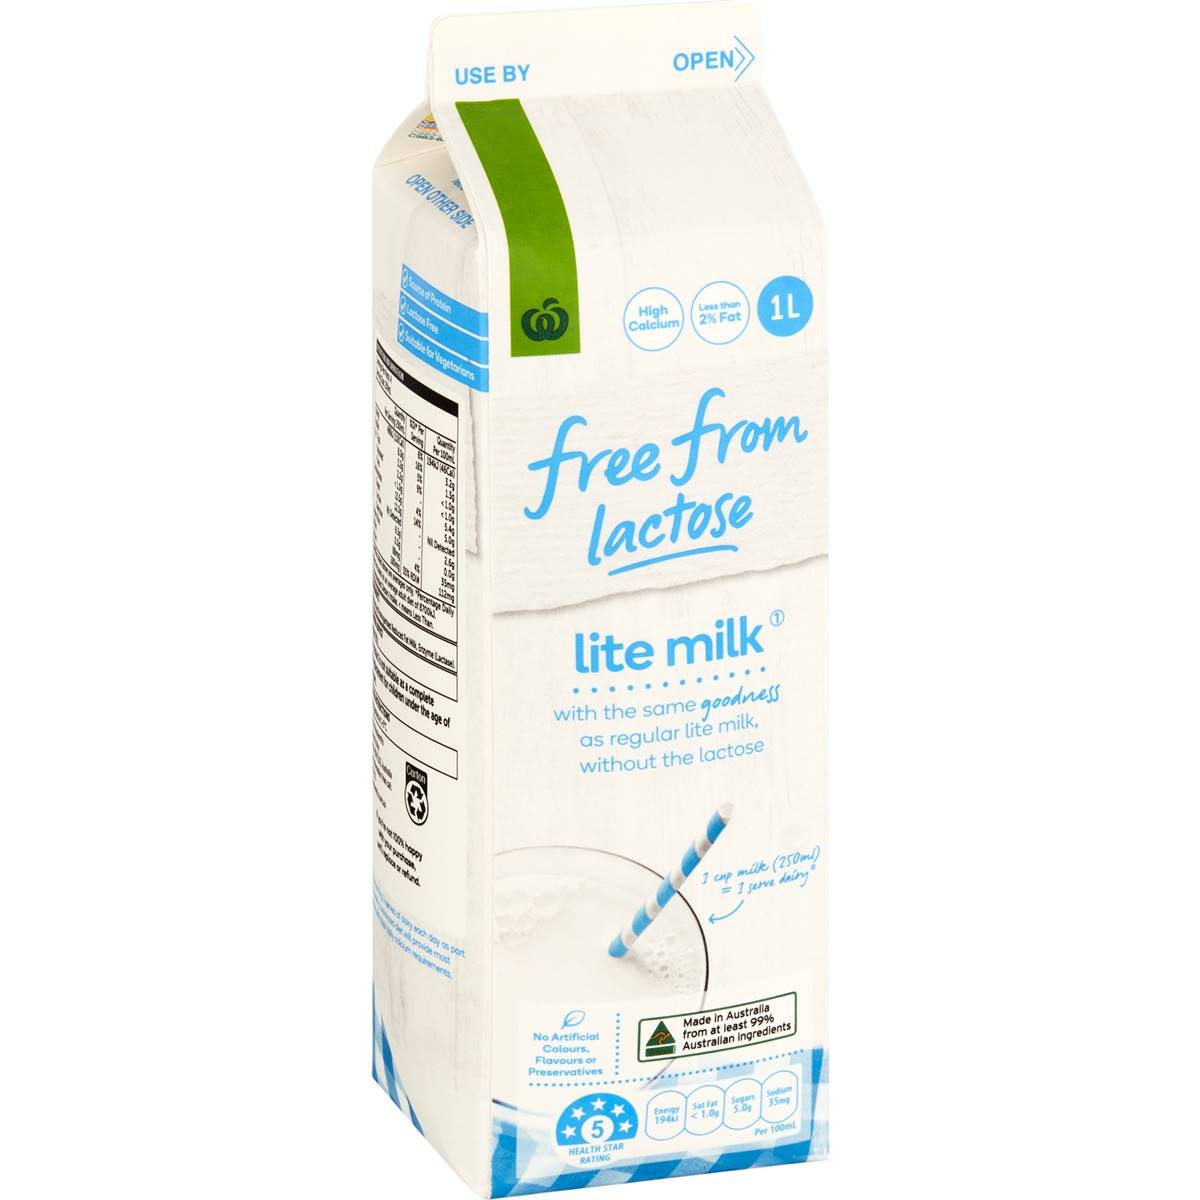 Calories in Woolworths Free From Lactose Light Milk